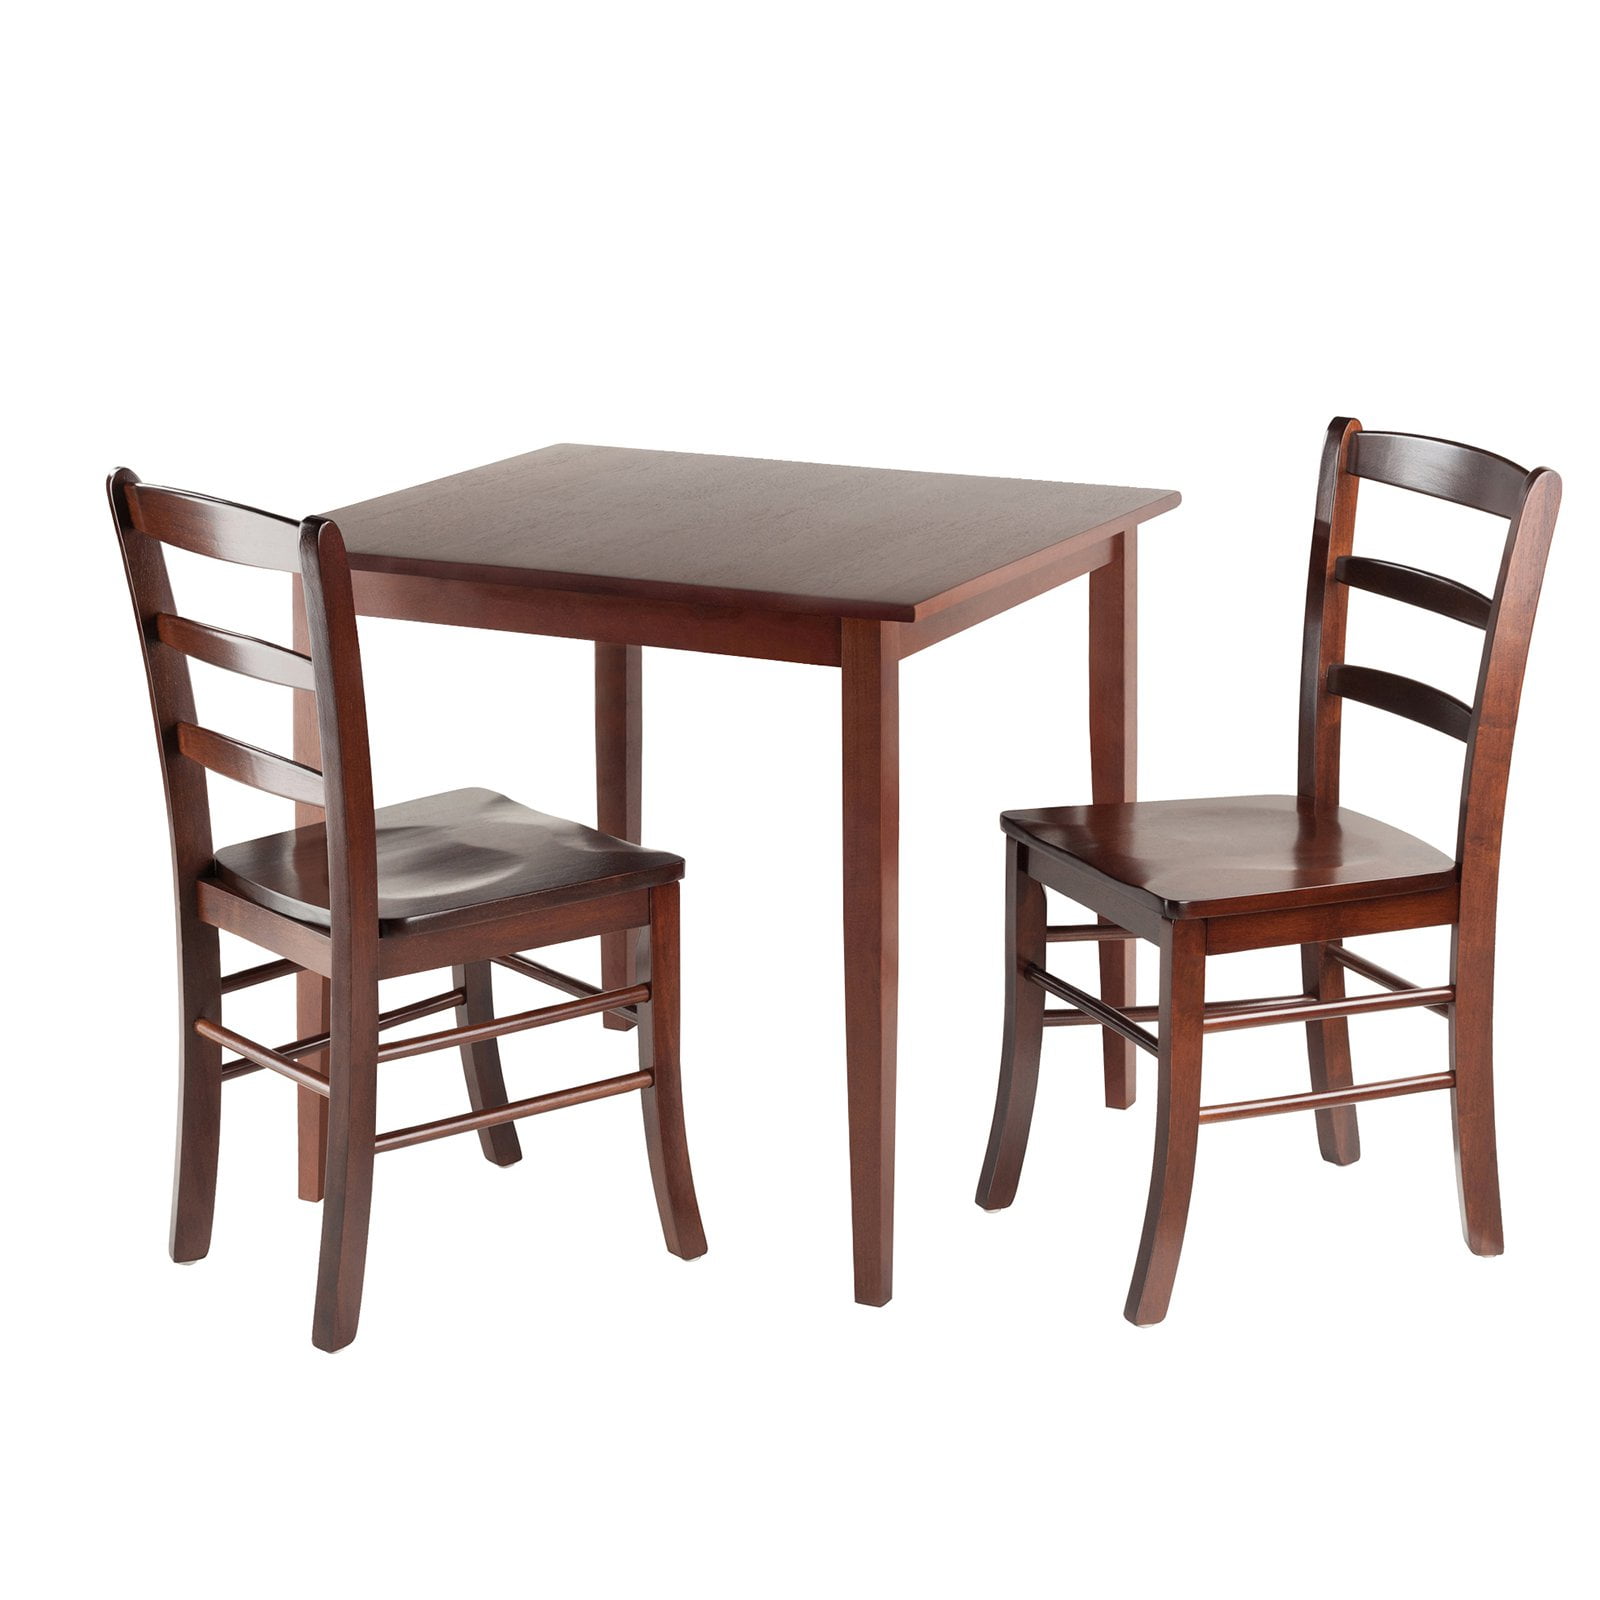 Small Dining Table For 2